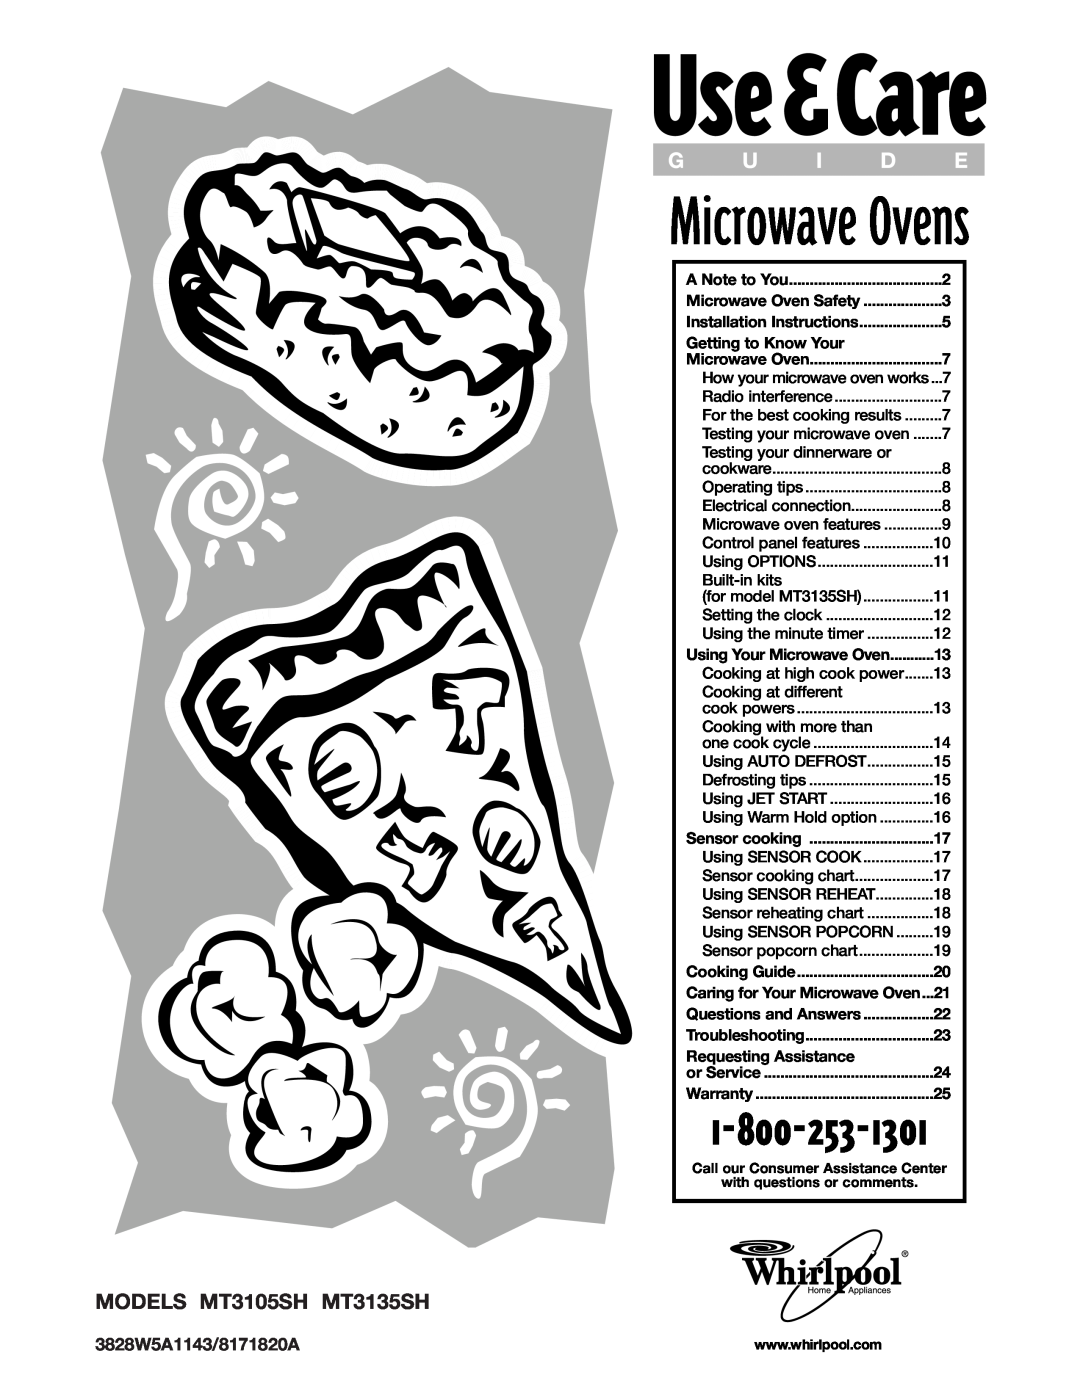 Whirlpool installation instructions Microwave Ovens, MODELS MT3105SH MT3135SH, A Note to You, Getting to Know Your 